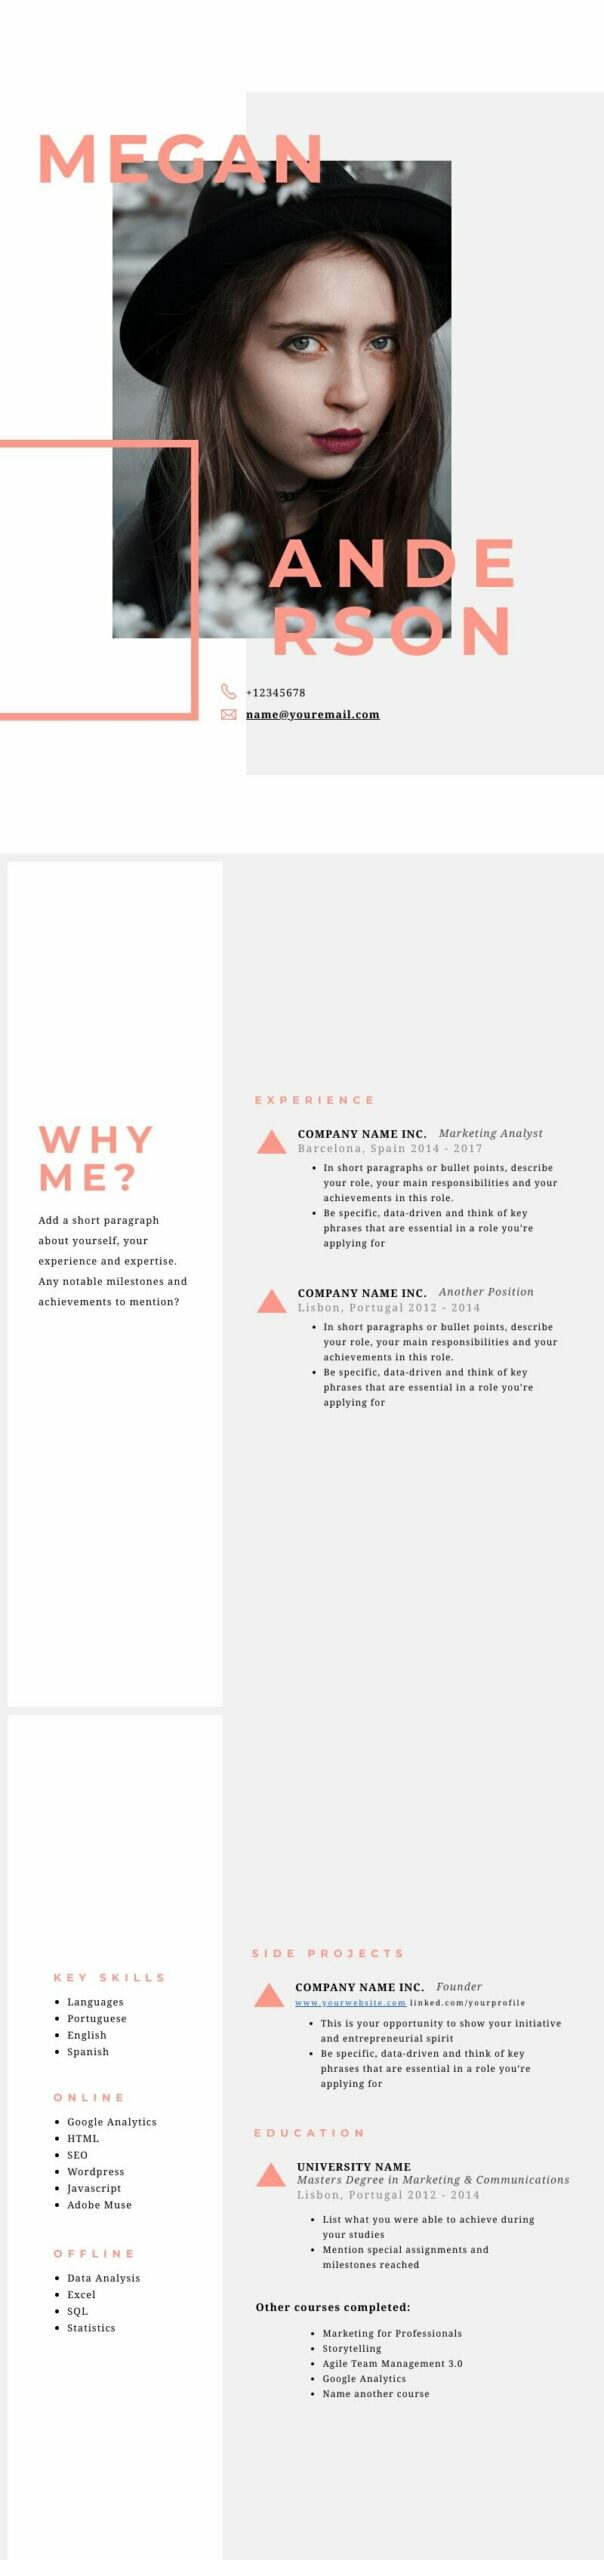 CV Email Marketer Template